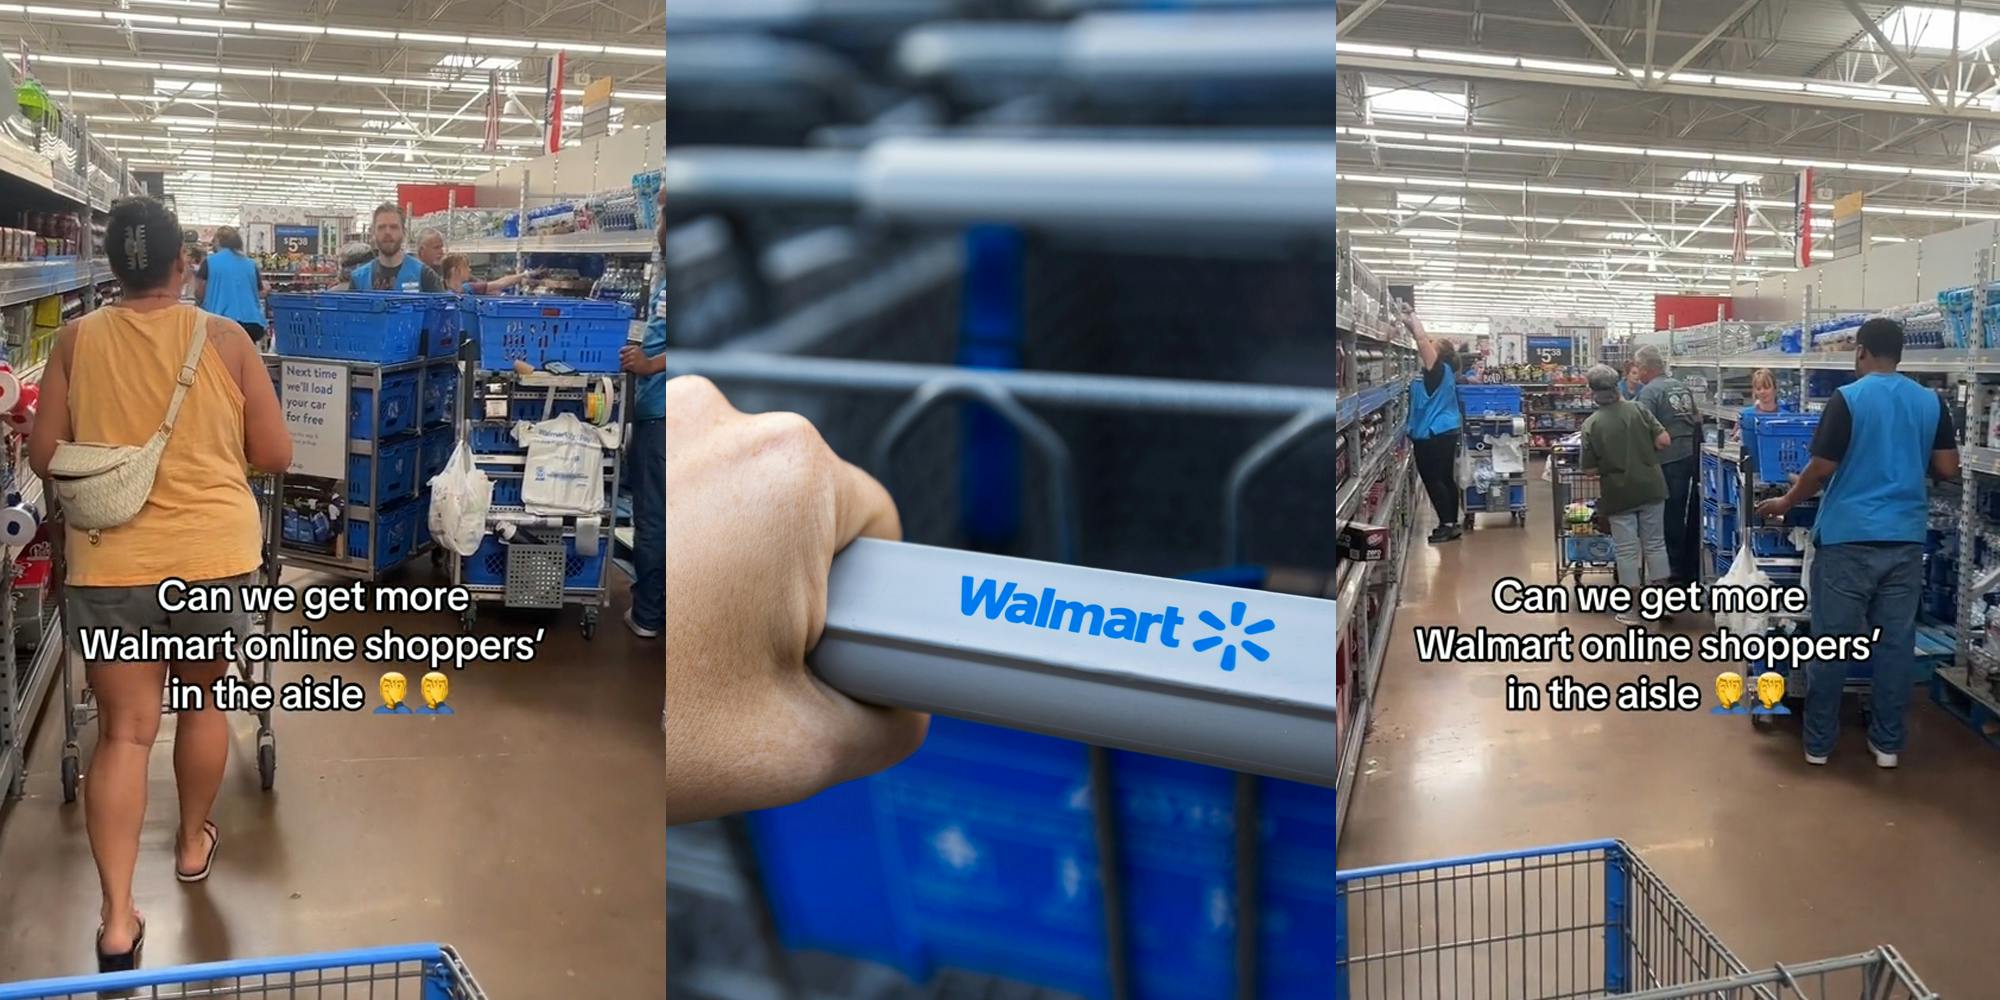 Walmart shoppers in aisle with caption "Can we get more Walmart online shoppers' in the aisle" (l) hand on Walmart branded cart (c) Walmart shoppers in aisle with caption "Can we get more Walmart online shoppers' in the aisle" (r)